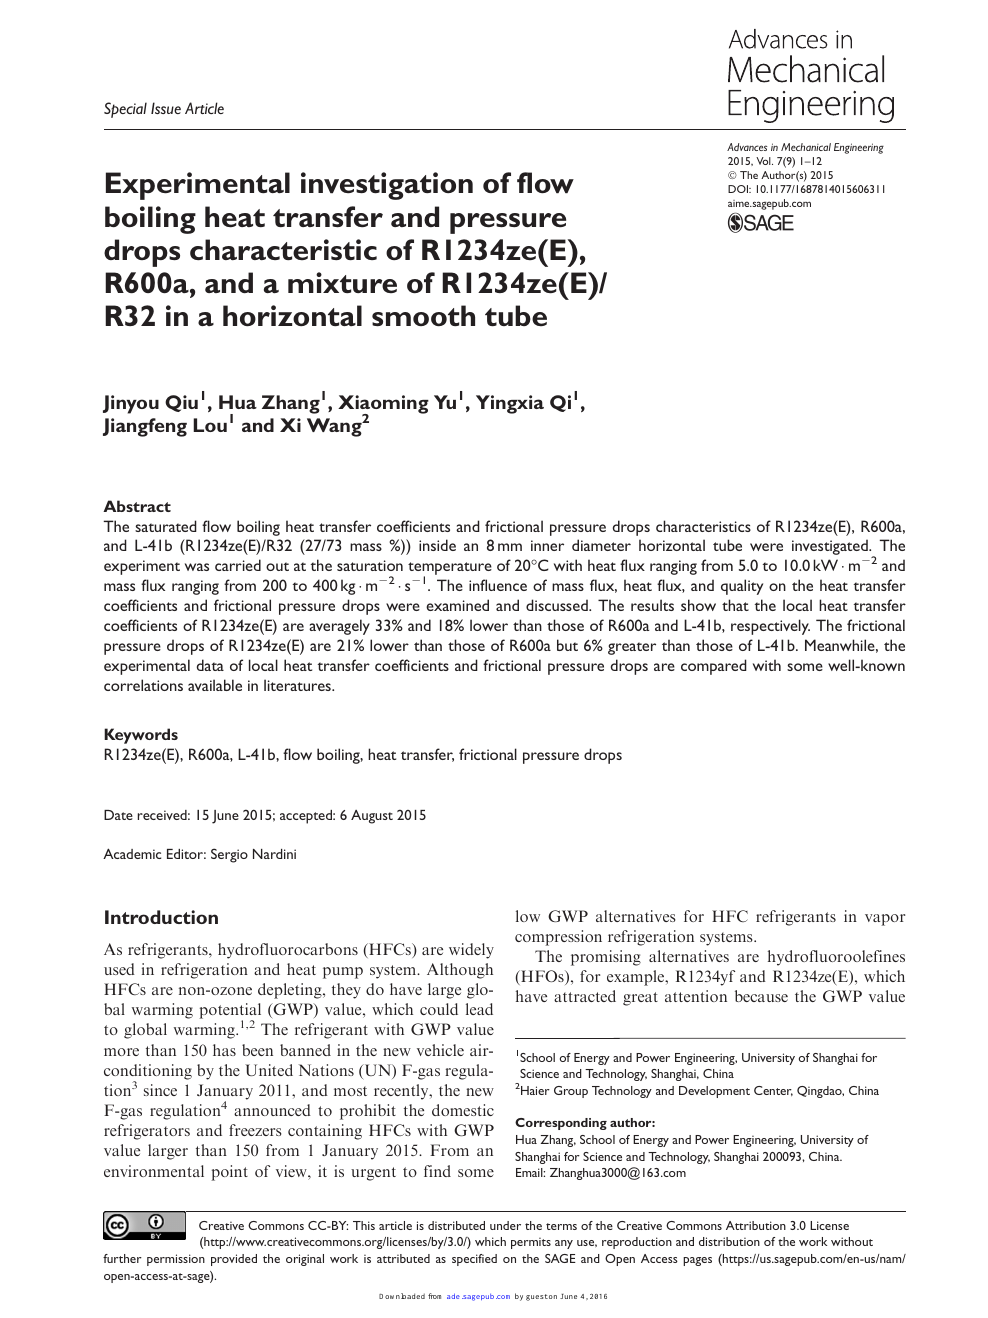 Experimental Investigation Of Flow Boiling Heat Transfer And Pressure Drops Characteristic Of R1234ze E R600a And A Mixture Of R1234ze E R32 In A Horizontal Smooth Tube Topic Of Research Paper In Mechanical Engineering